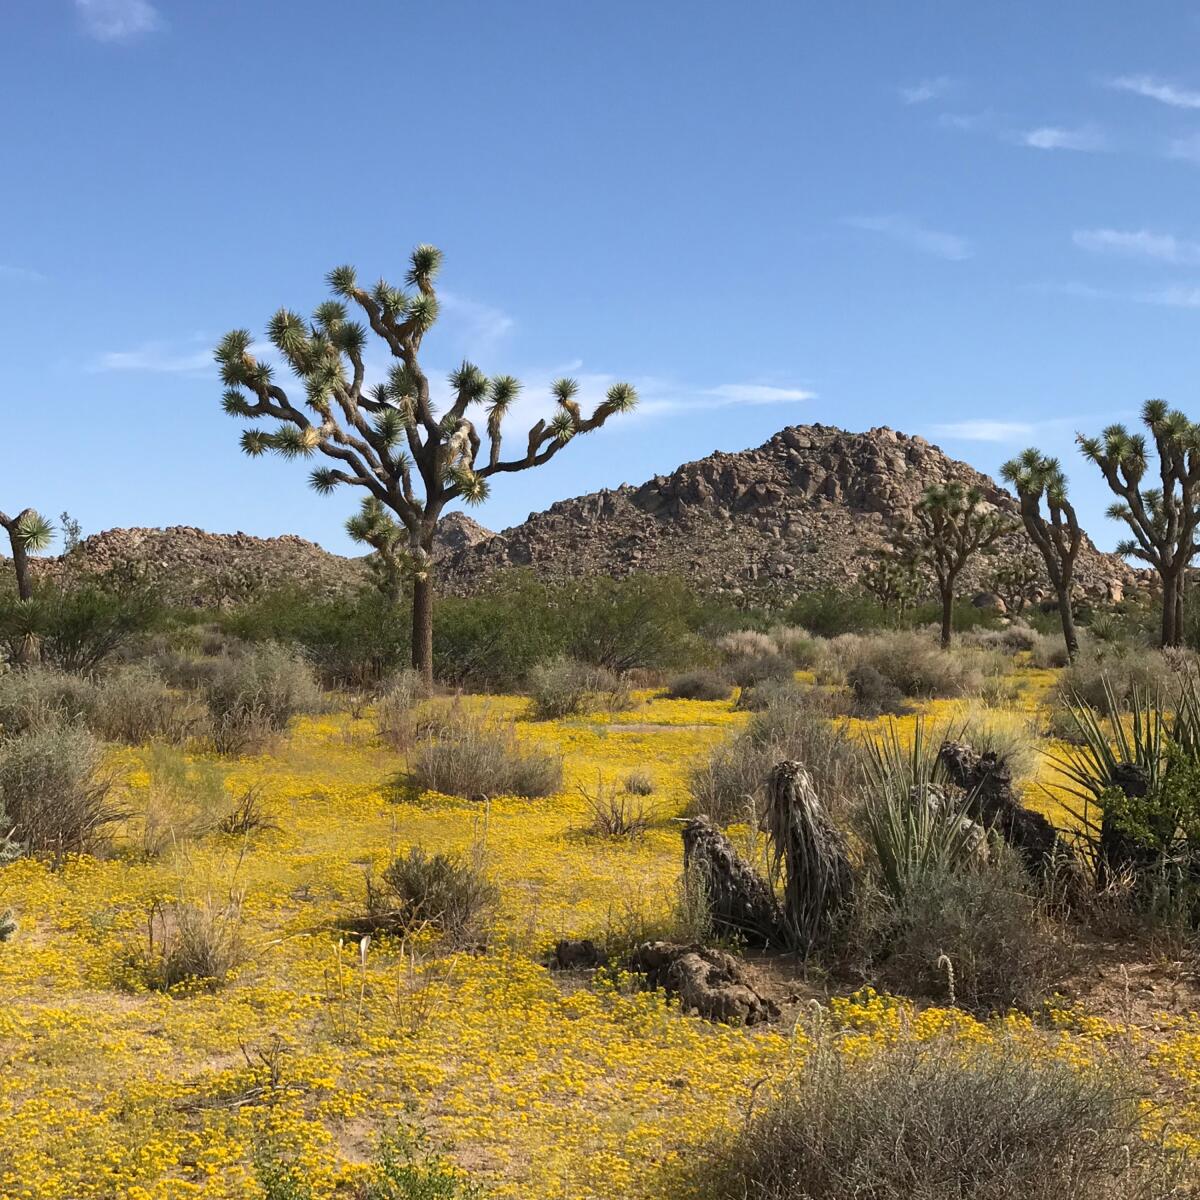 A desert scene of Joshua trees, scrubby plans, hills and yellow ground cover.